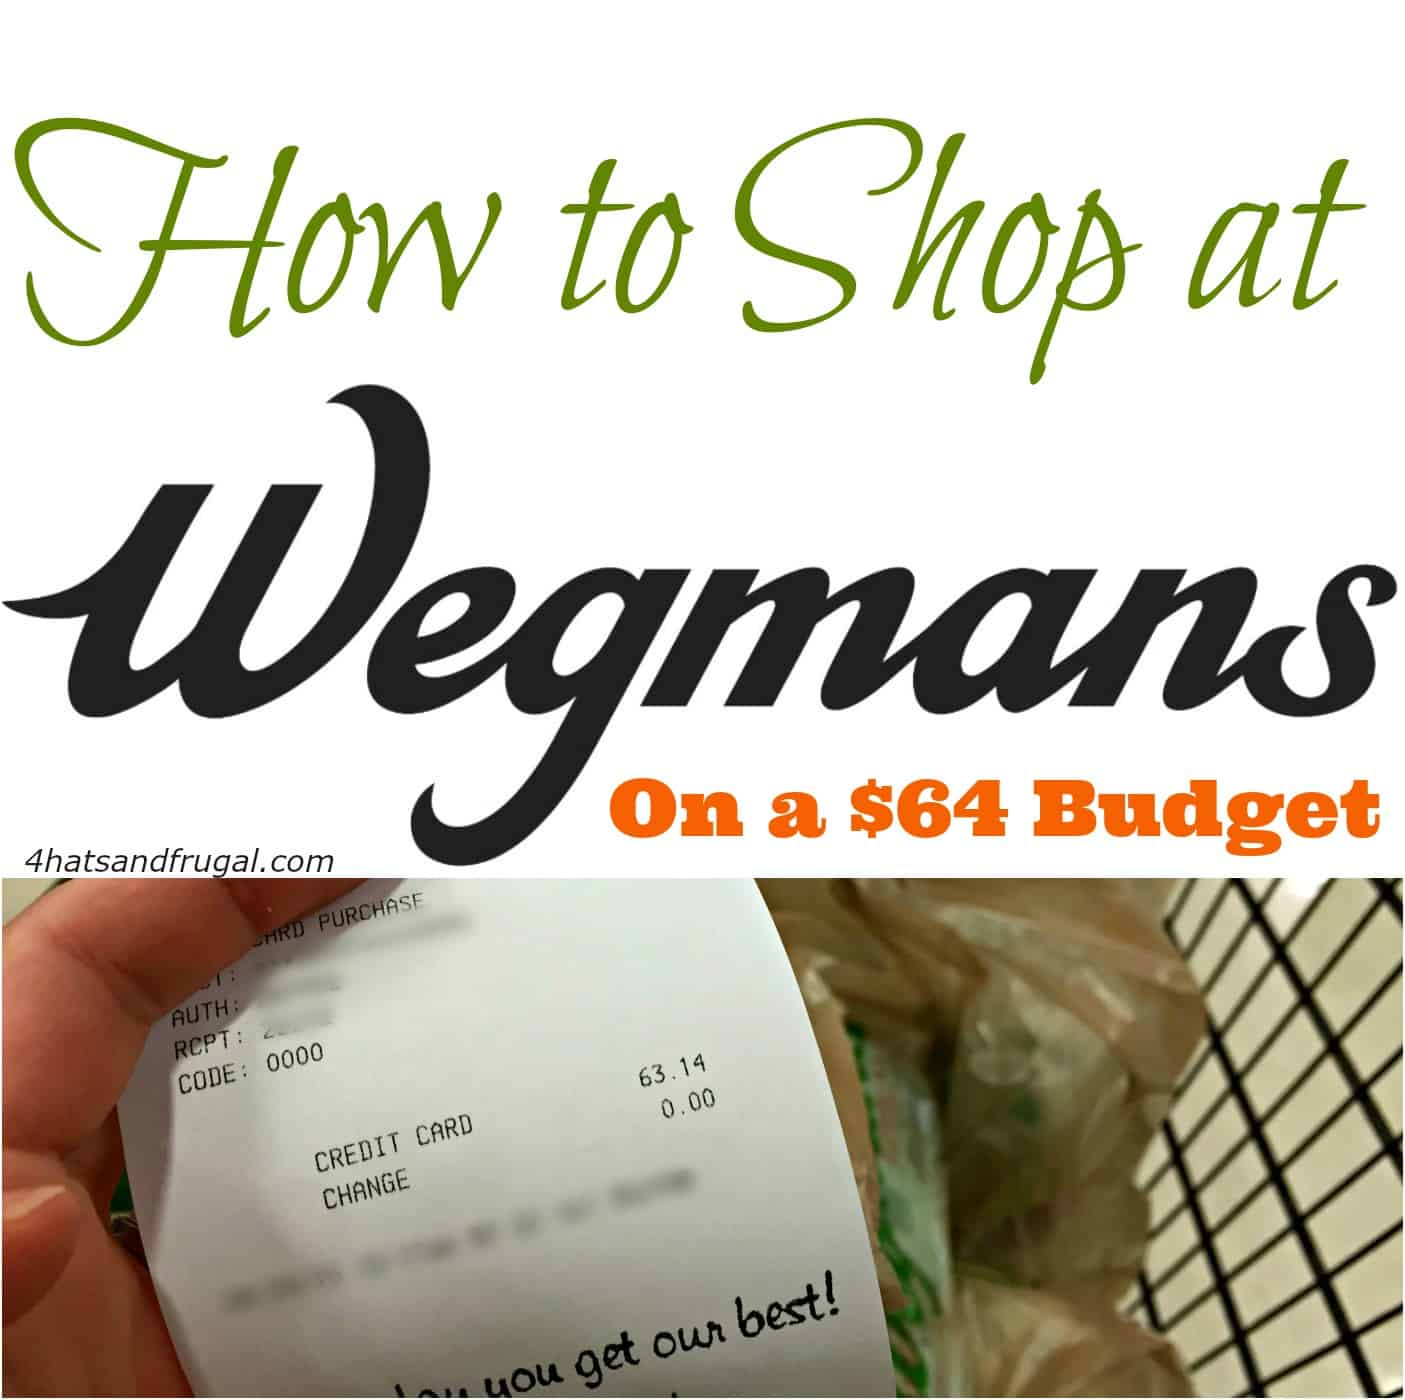 This mom shops Wegmans for her Paleo family on a $64 grocery budget. See how she did it!